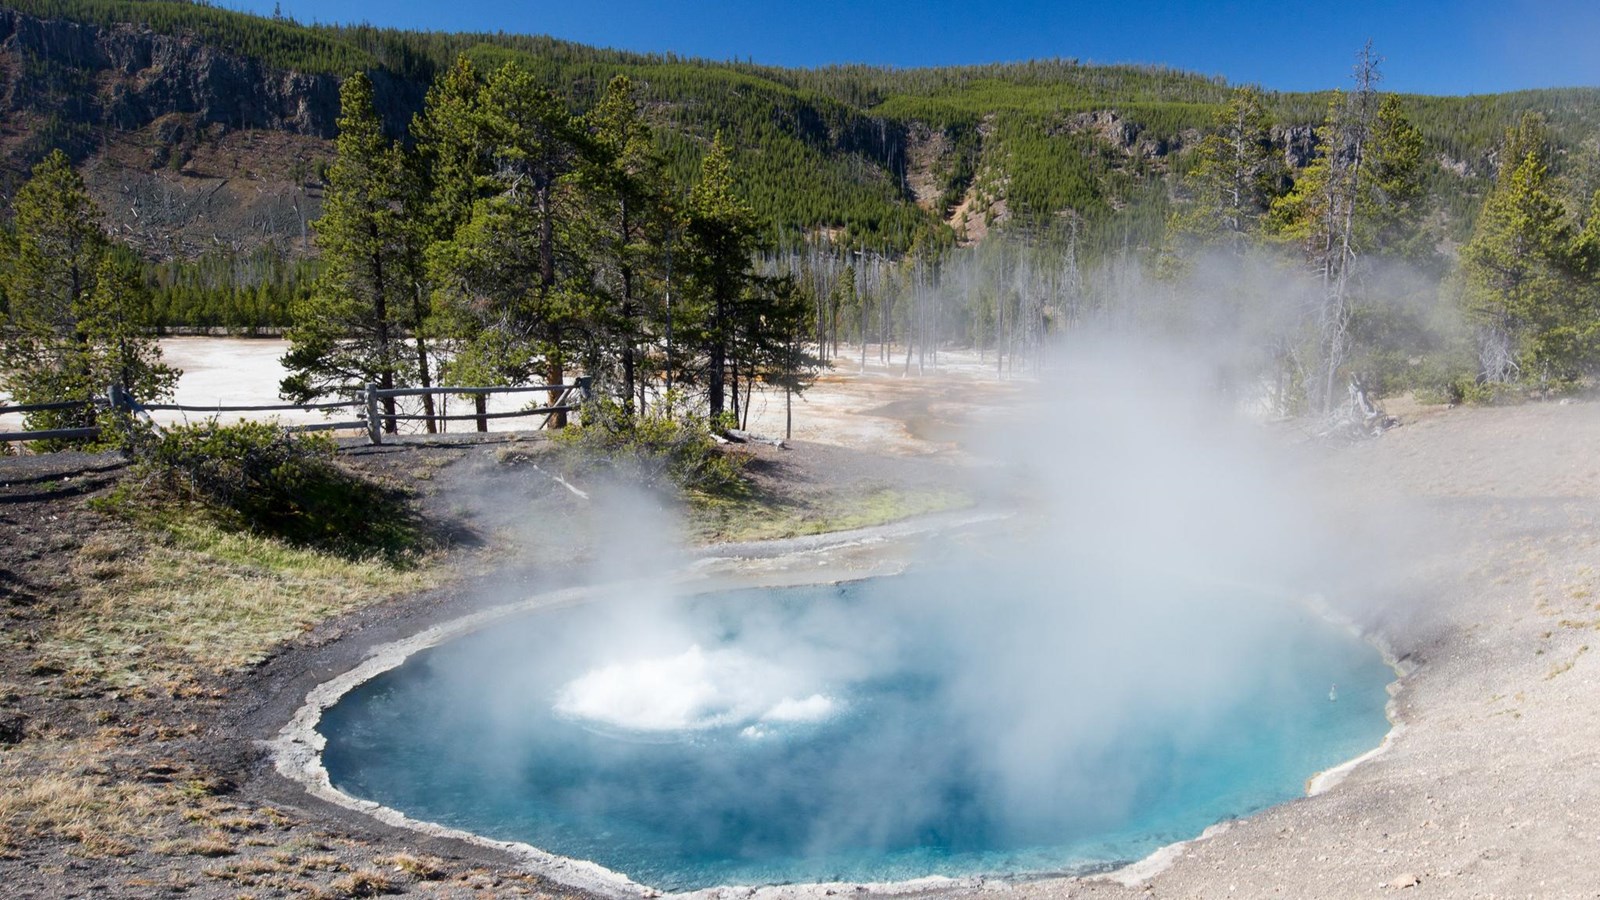 Steam rises off a turquoise blue hot spring as bubbles rise to the surface of the water.